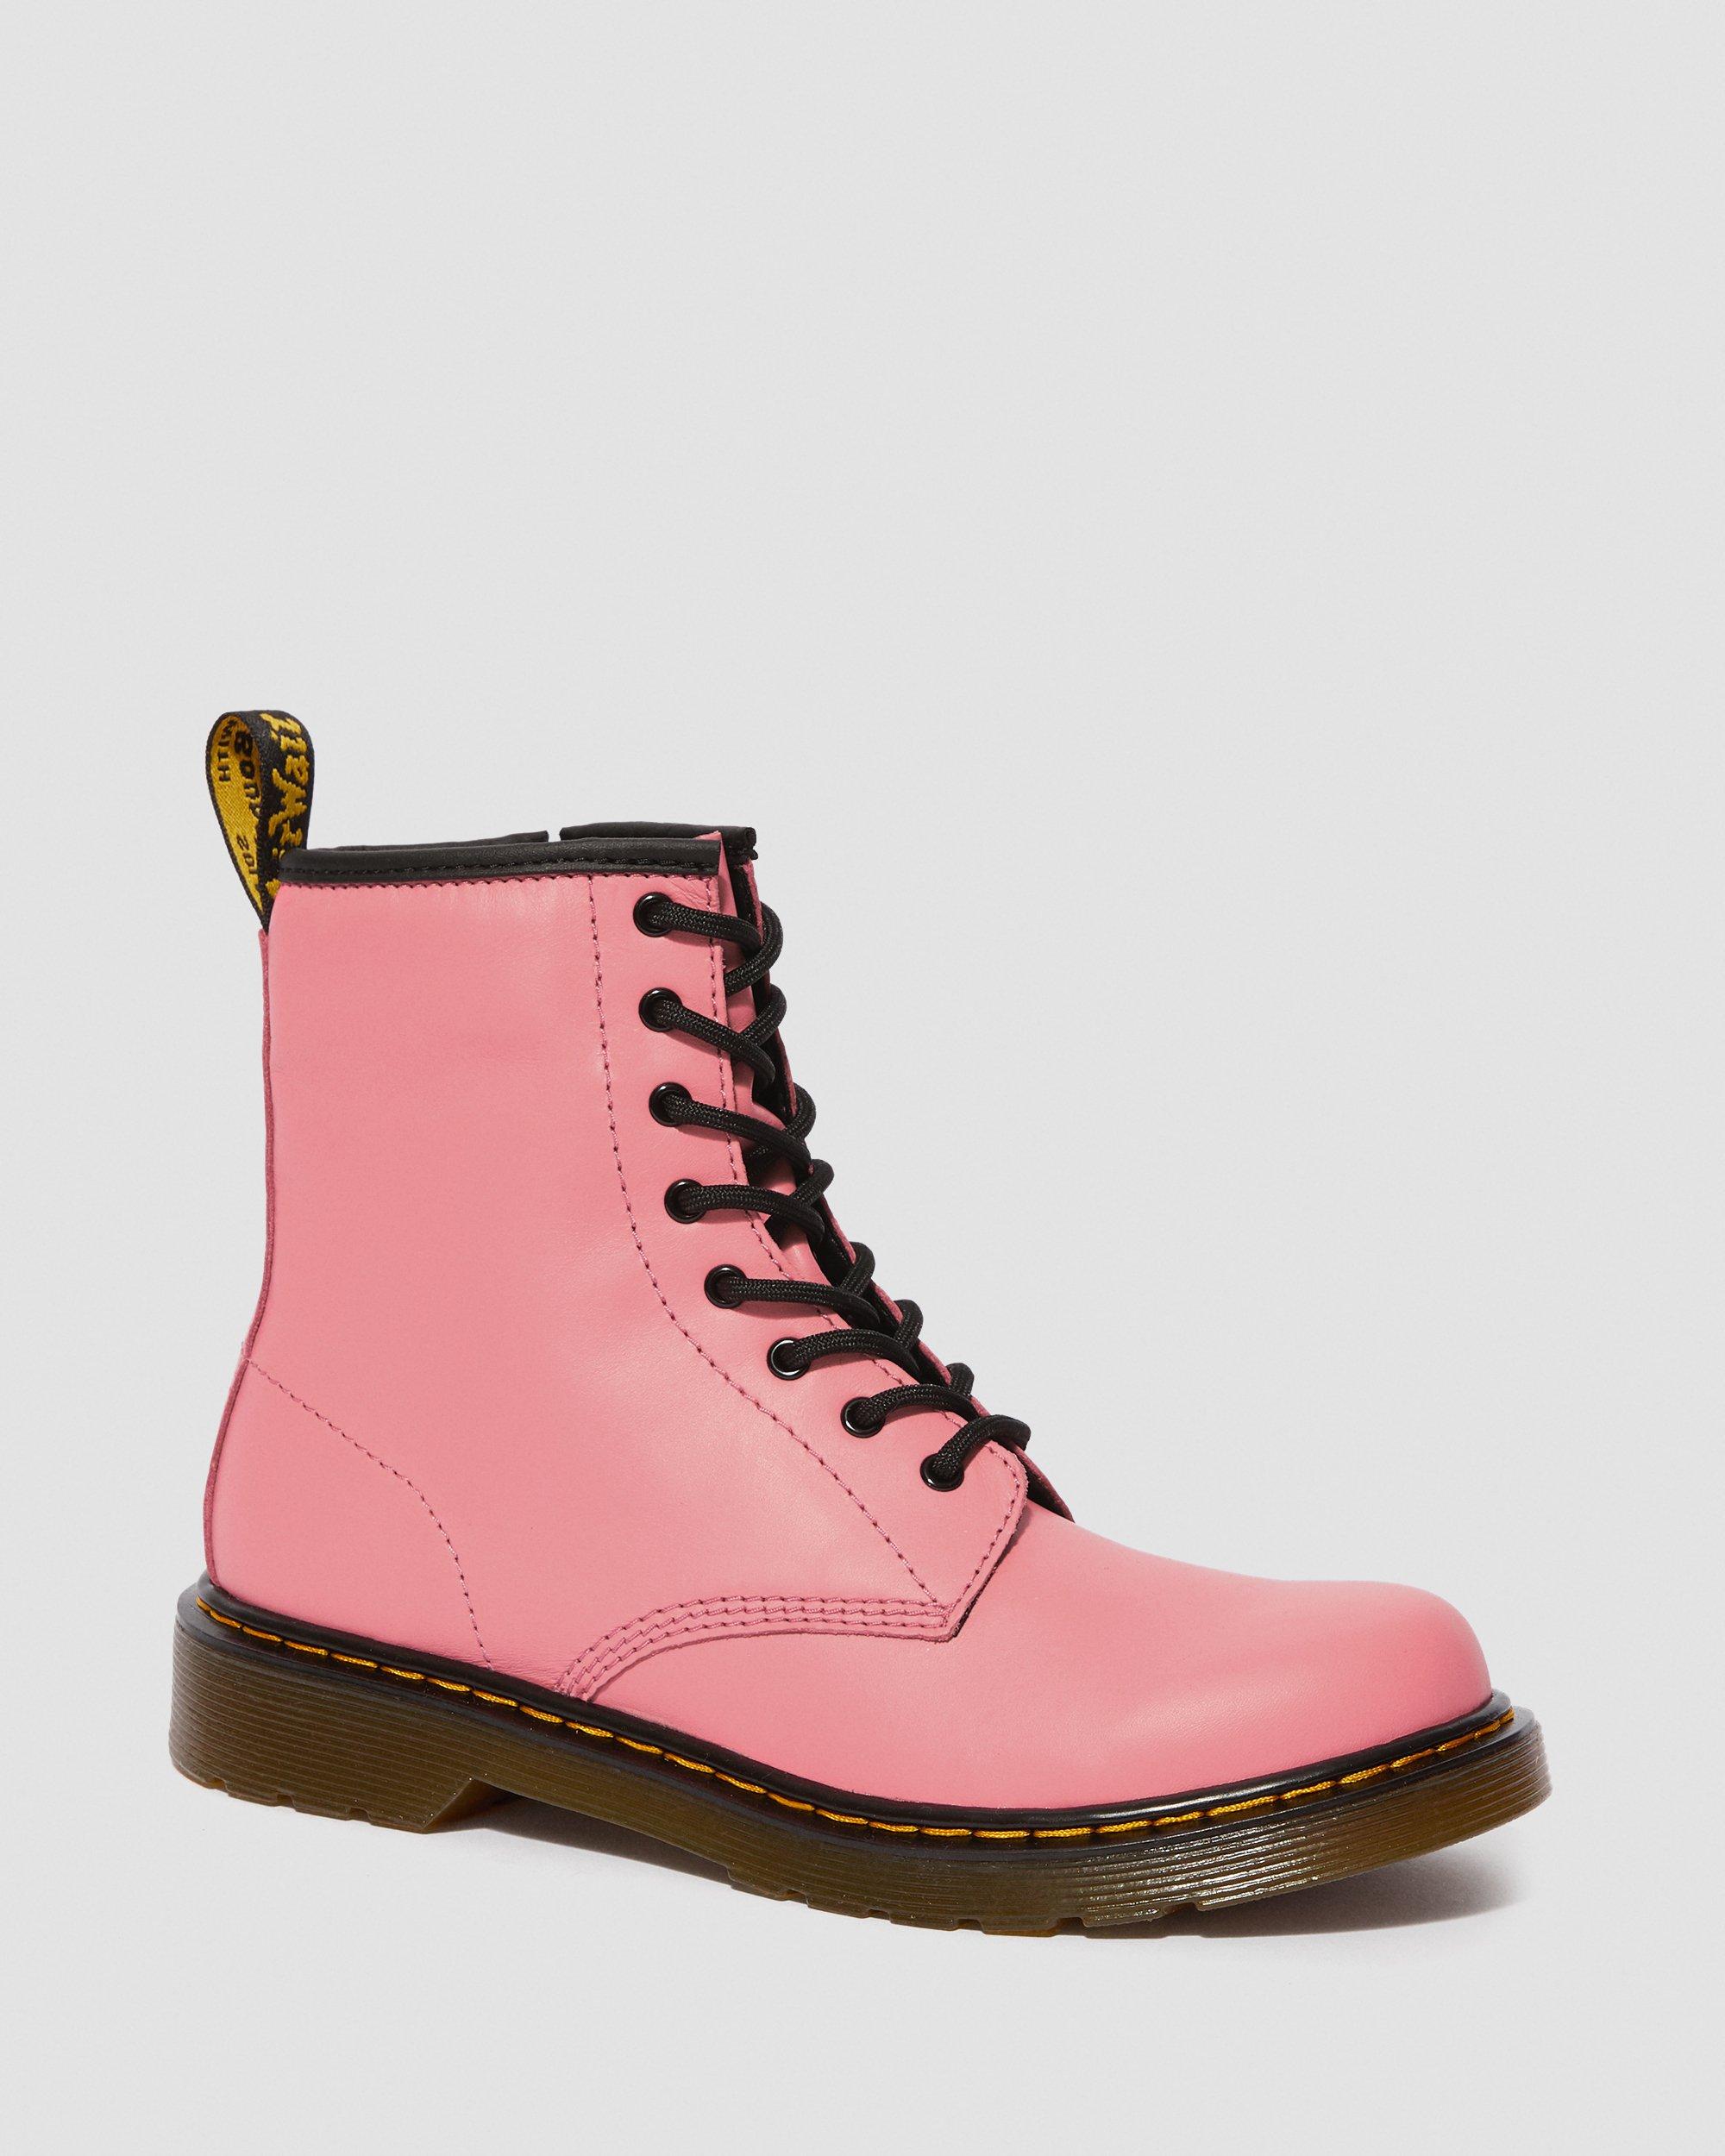 Youth 1460 Leather Lace Up Boots in Acid Pink | Dr. Martens